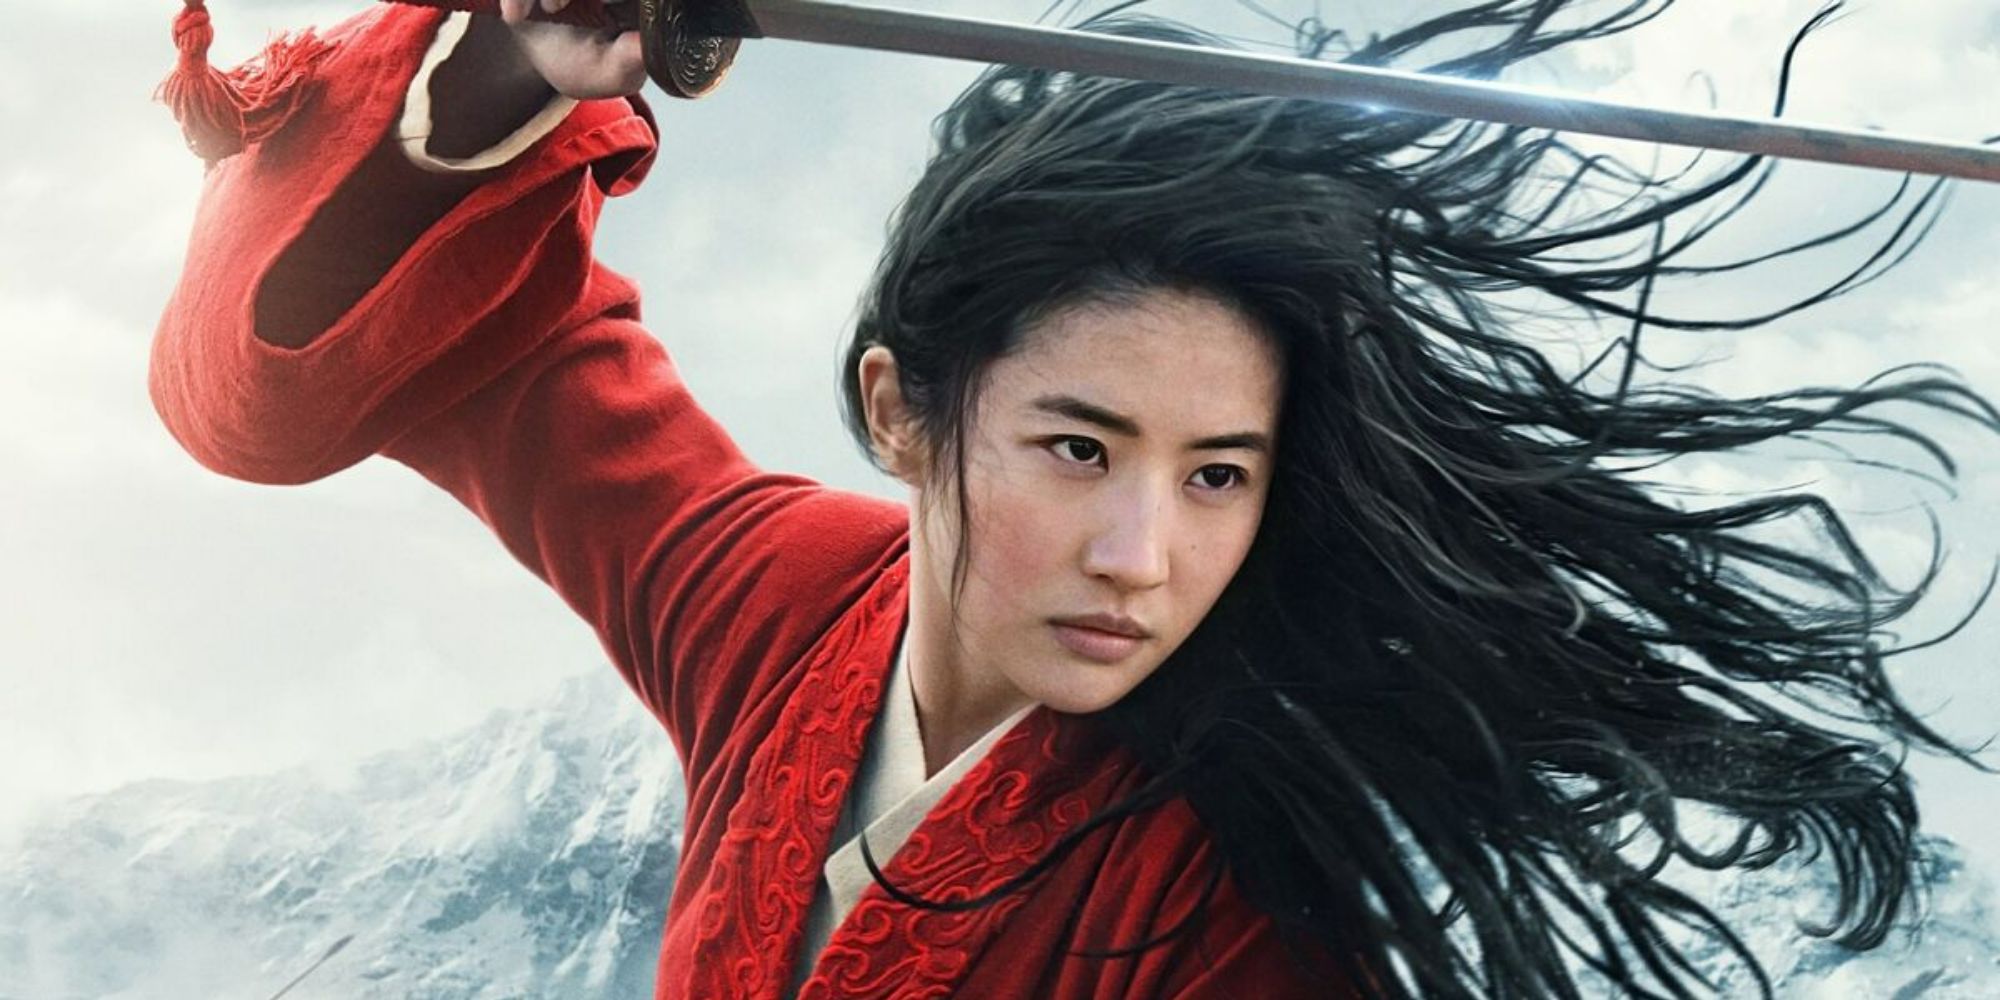 Mulan in live-action